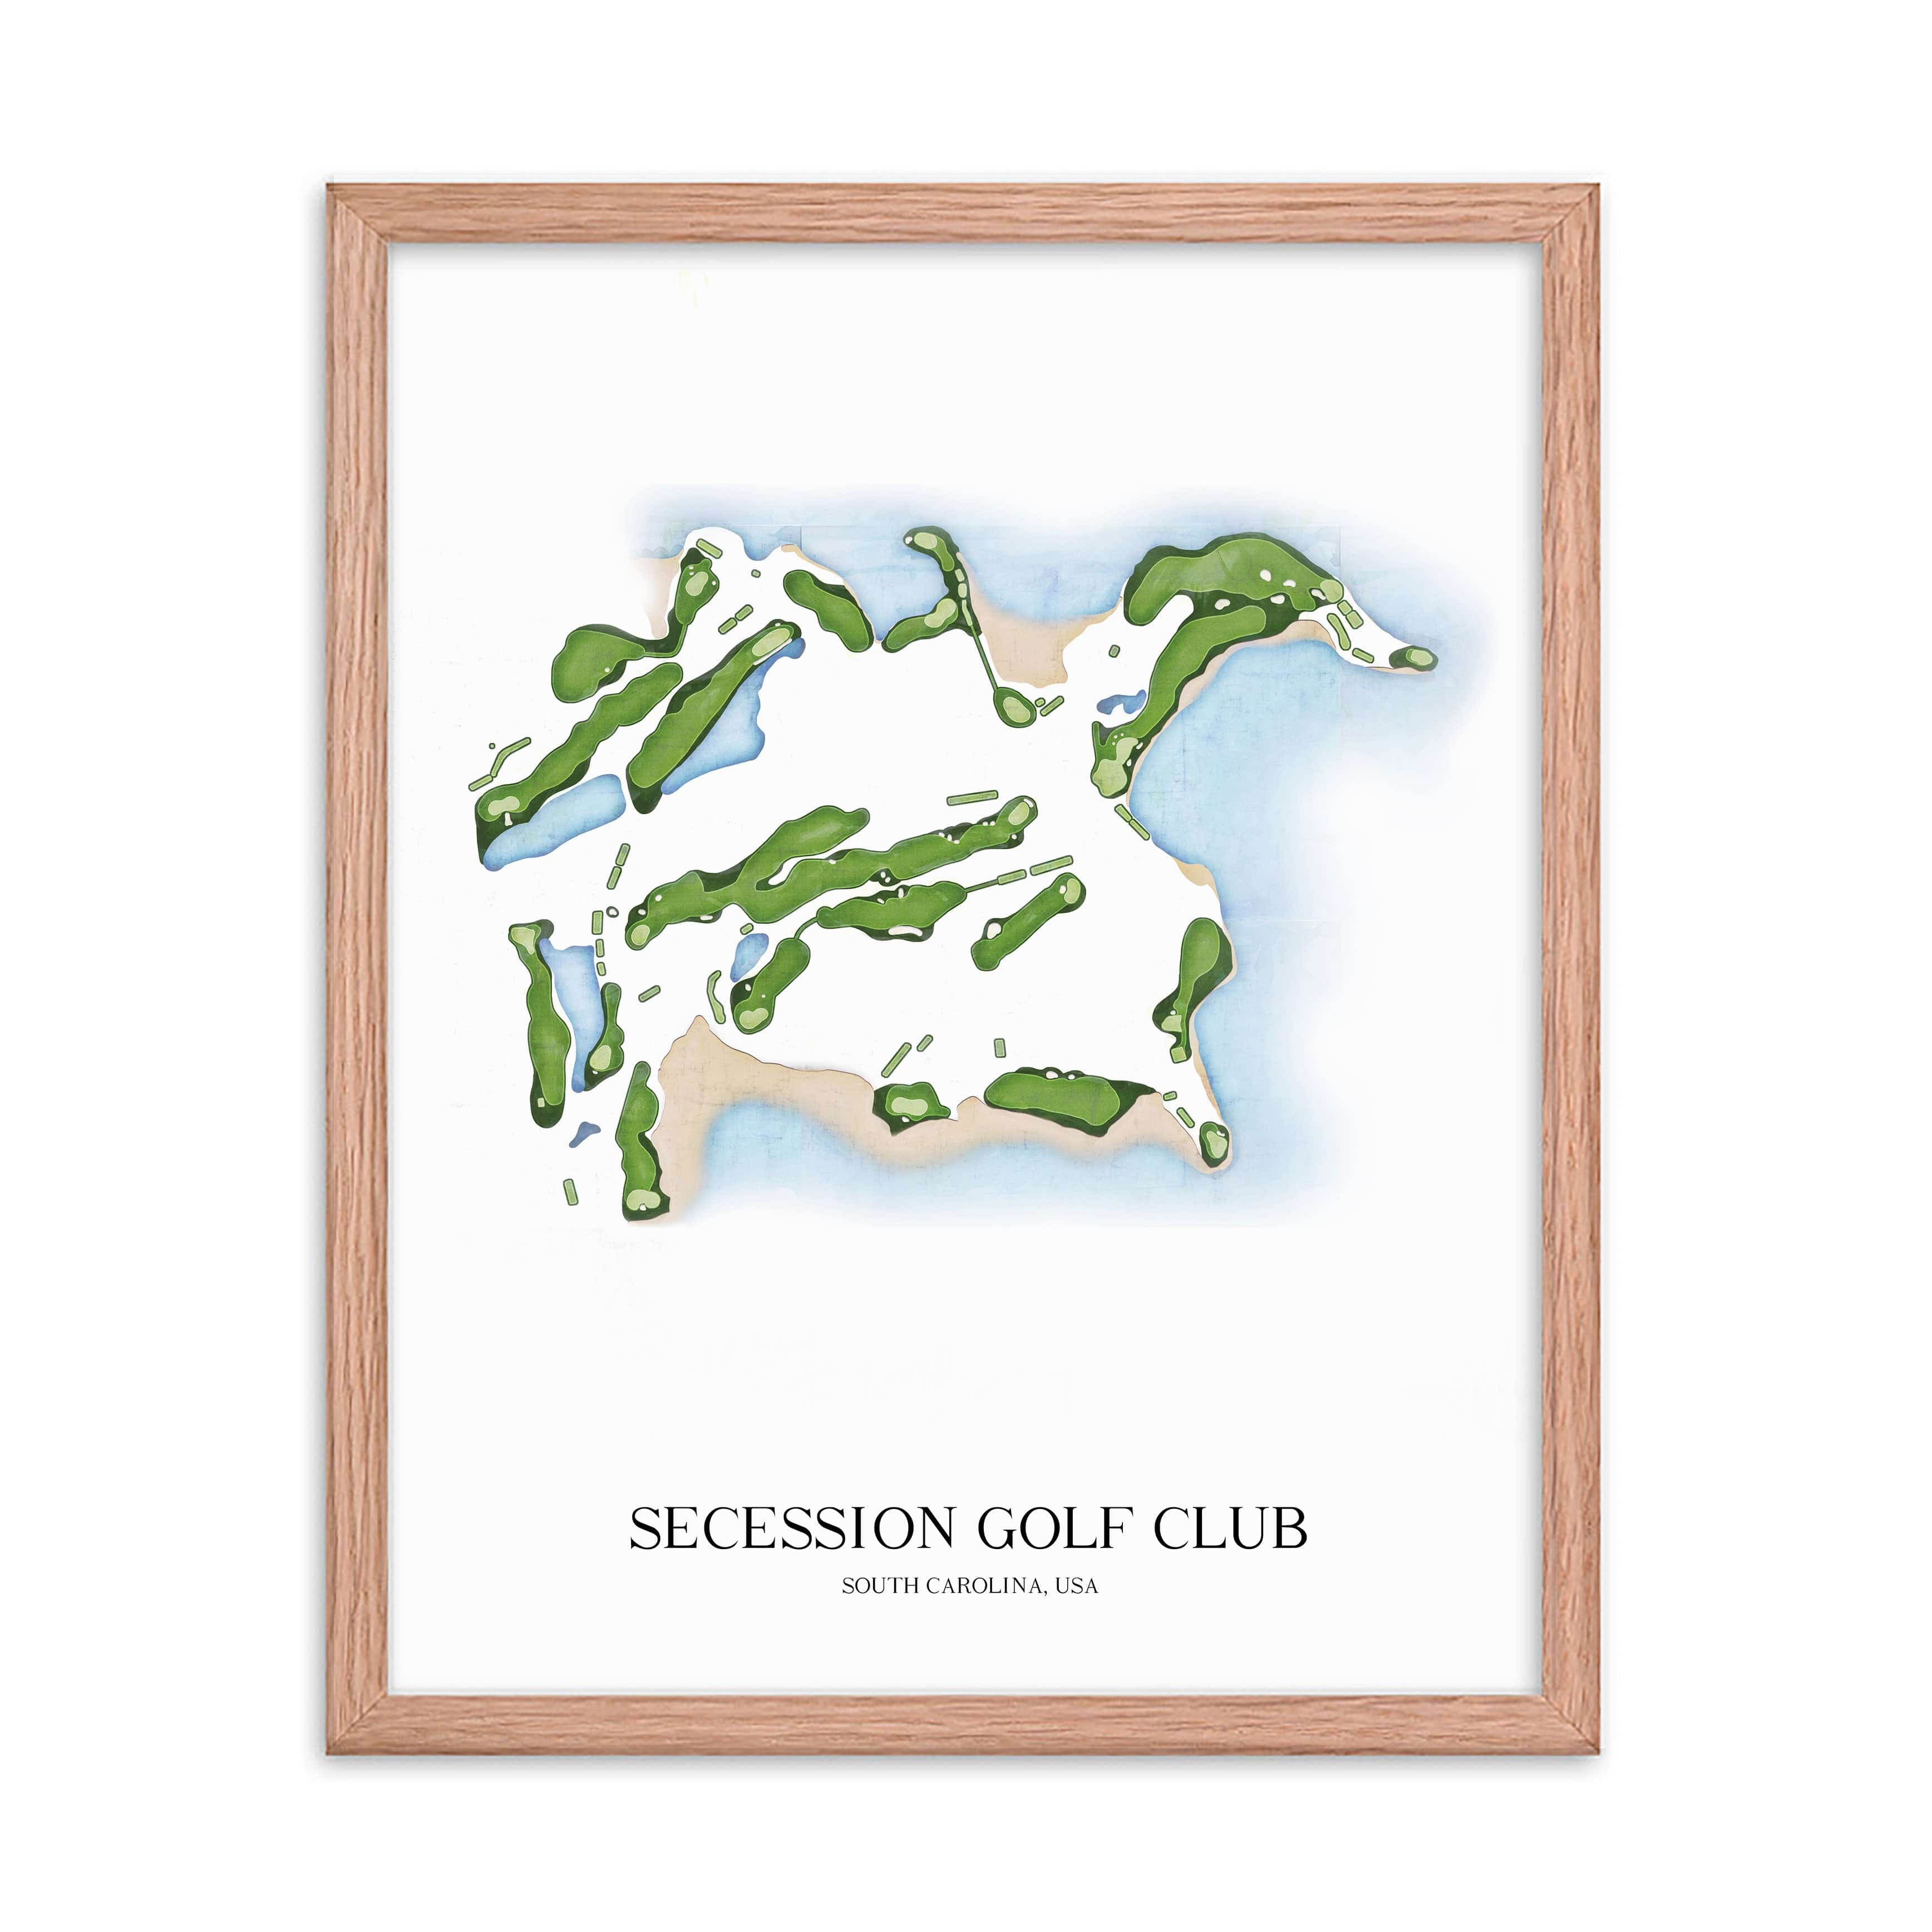 The 19th Hole Golf Shop - Golf Course Prints -  Secession Golf Club Golf Course Map